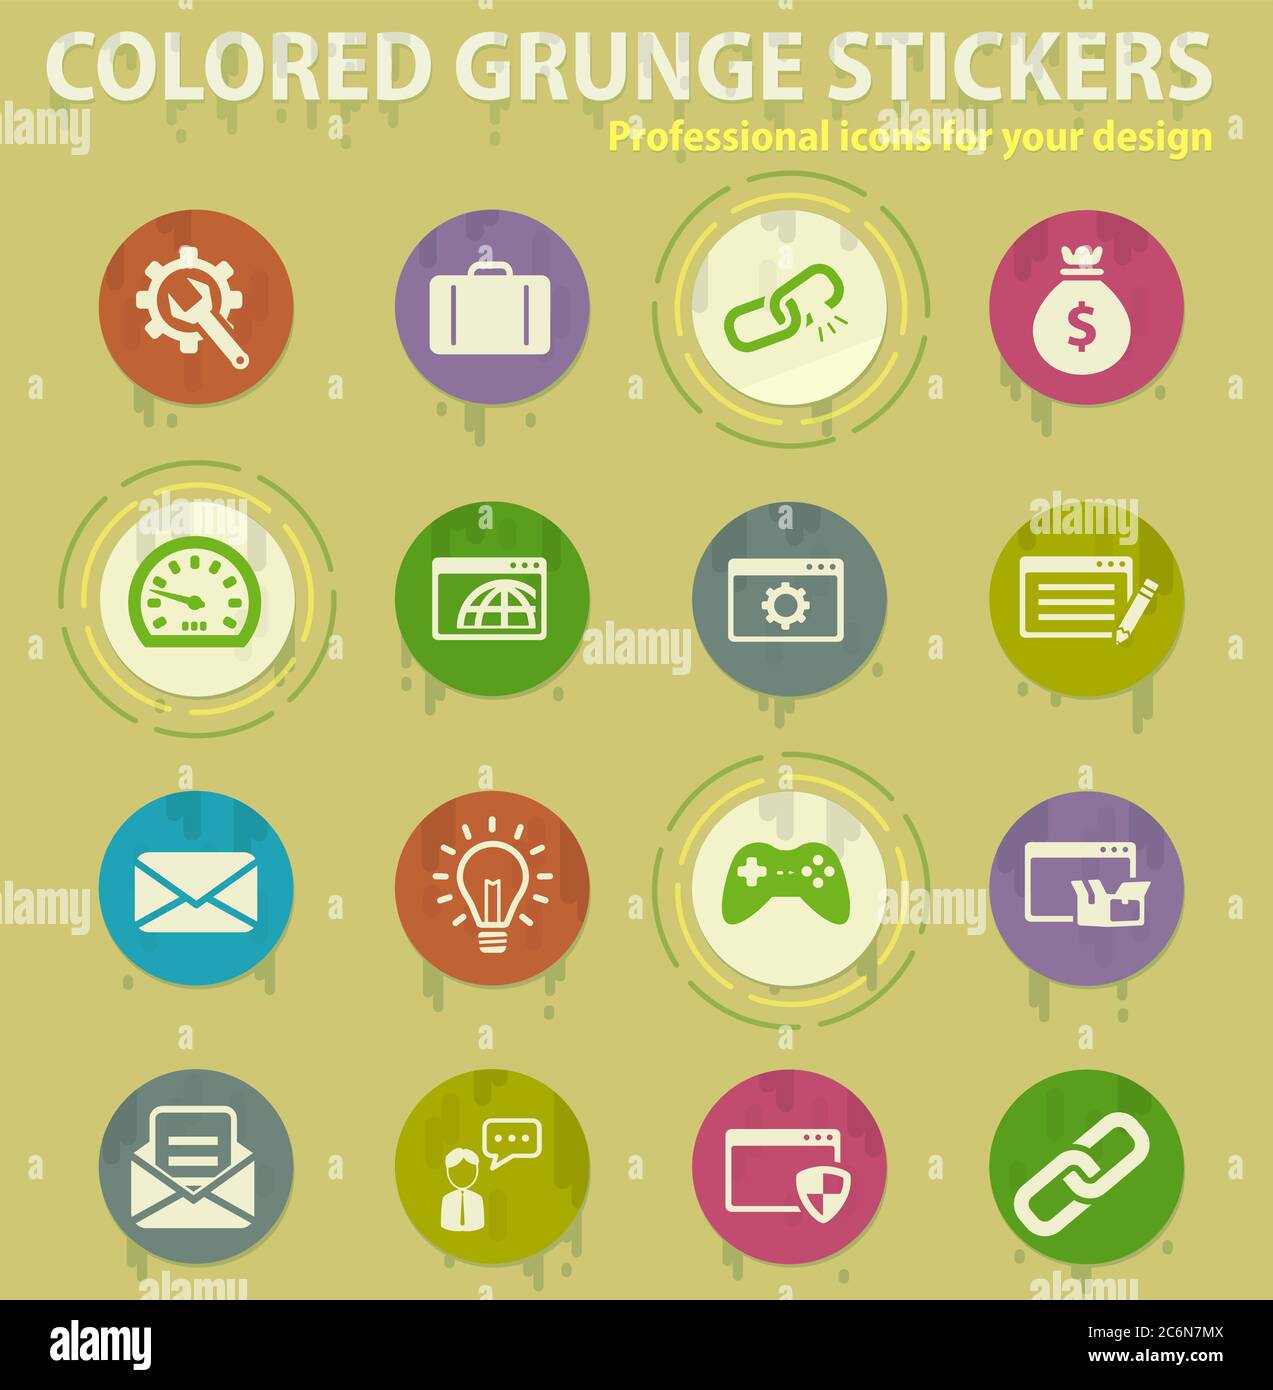 SEO and development colored grunge icons Stock Vector